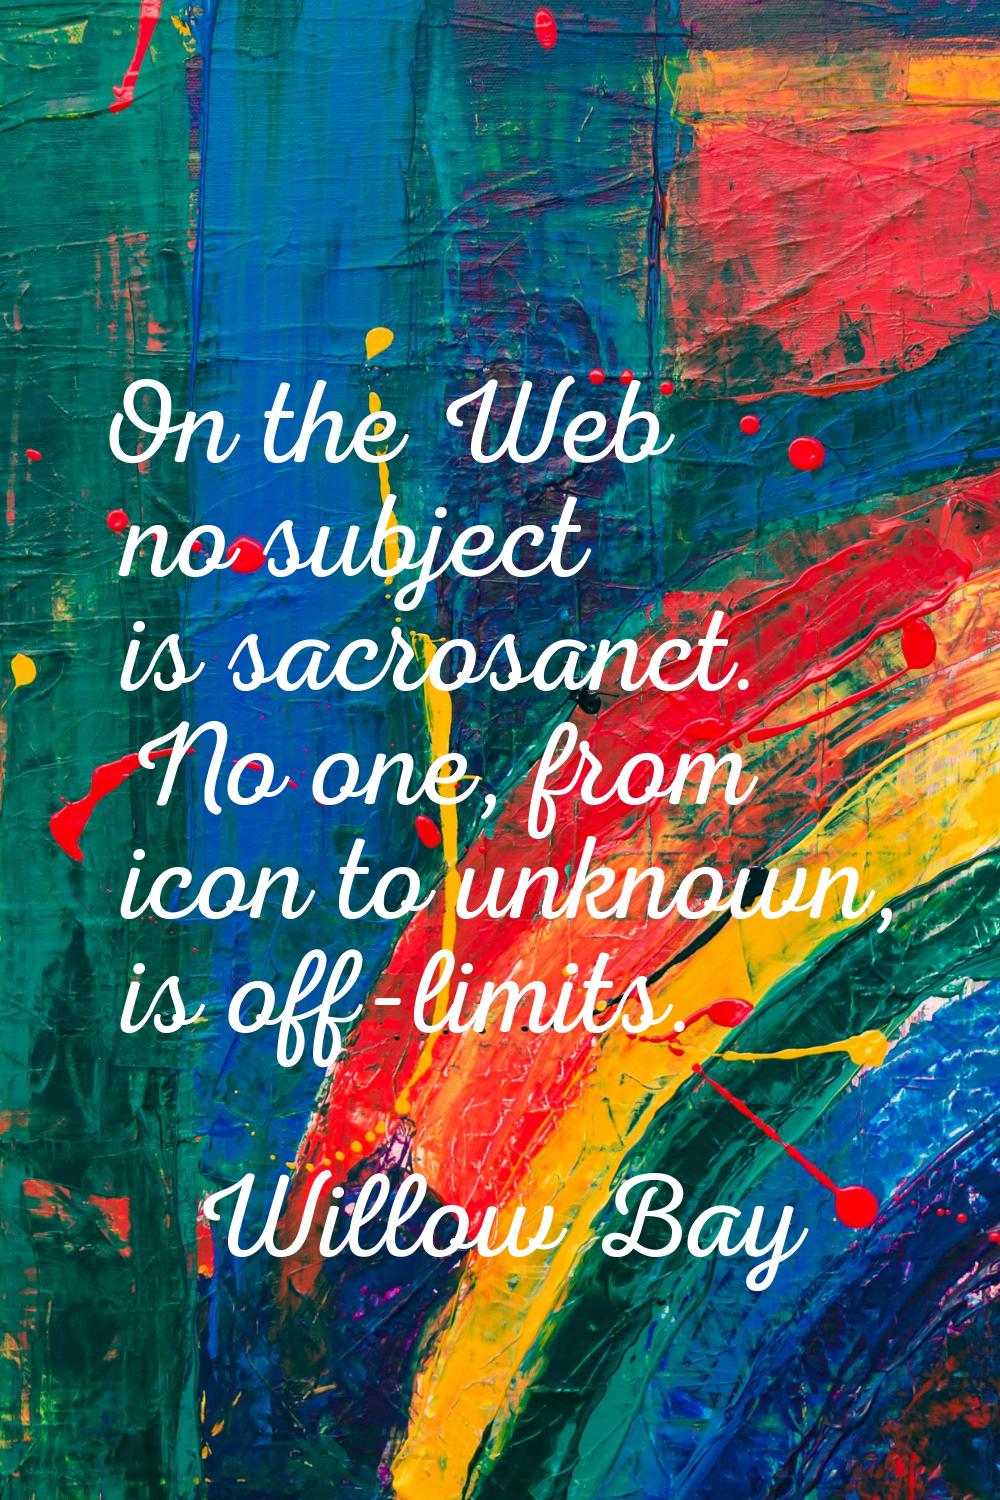 On the Web no subject is sacrosanct. No one, from icon to unknown, is off-limits.